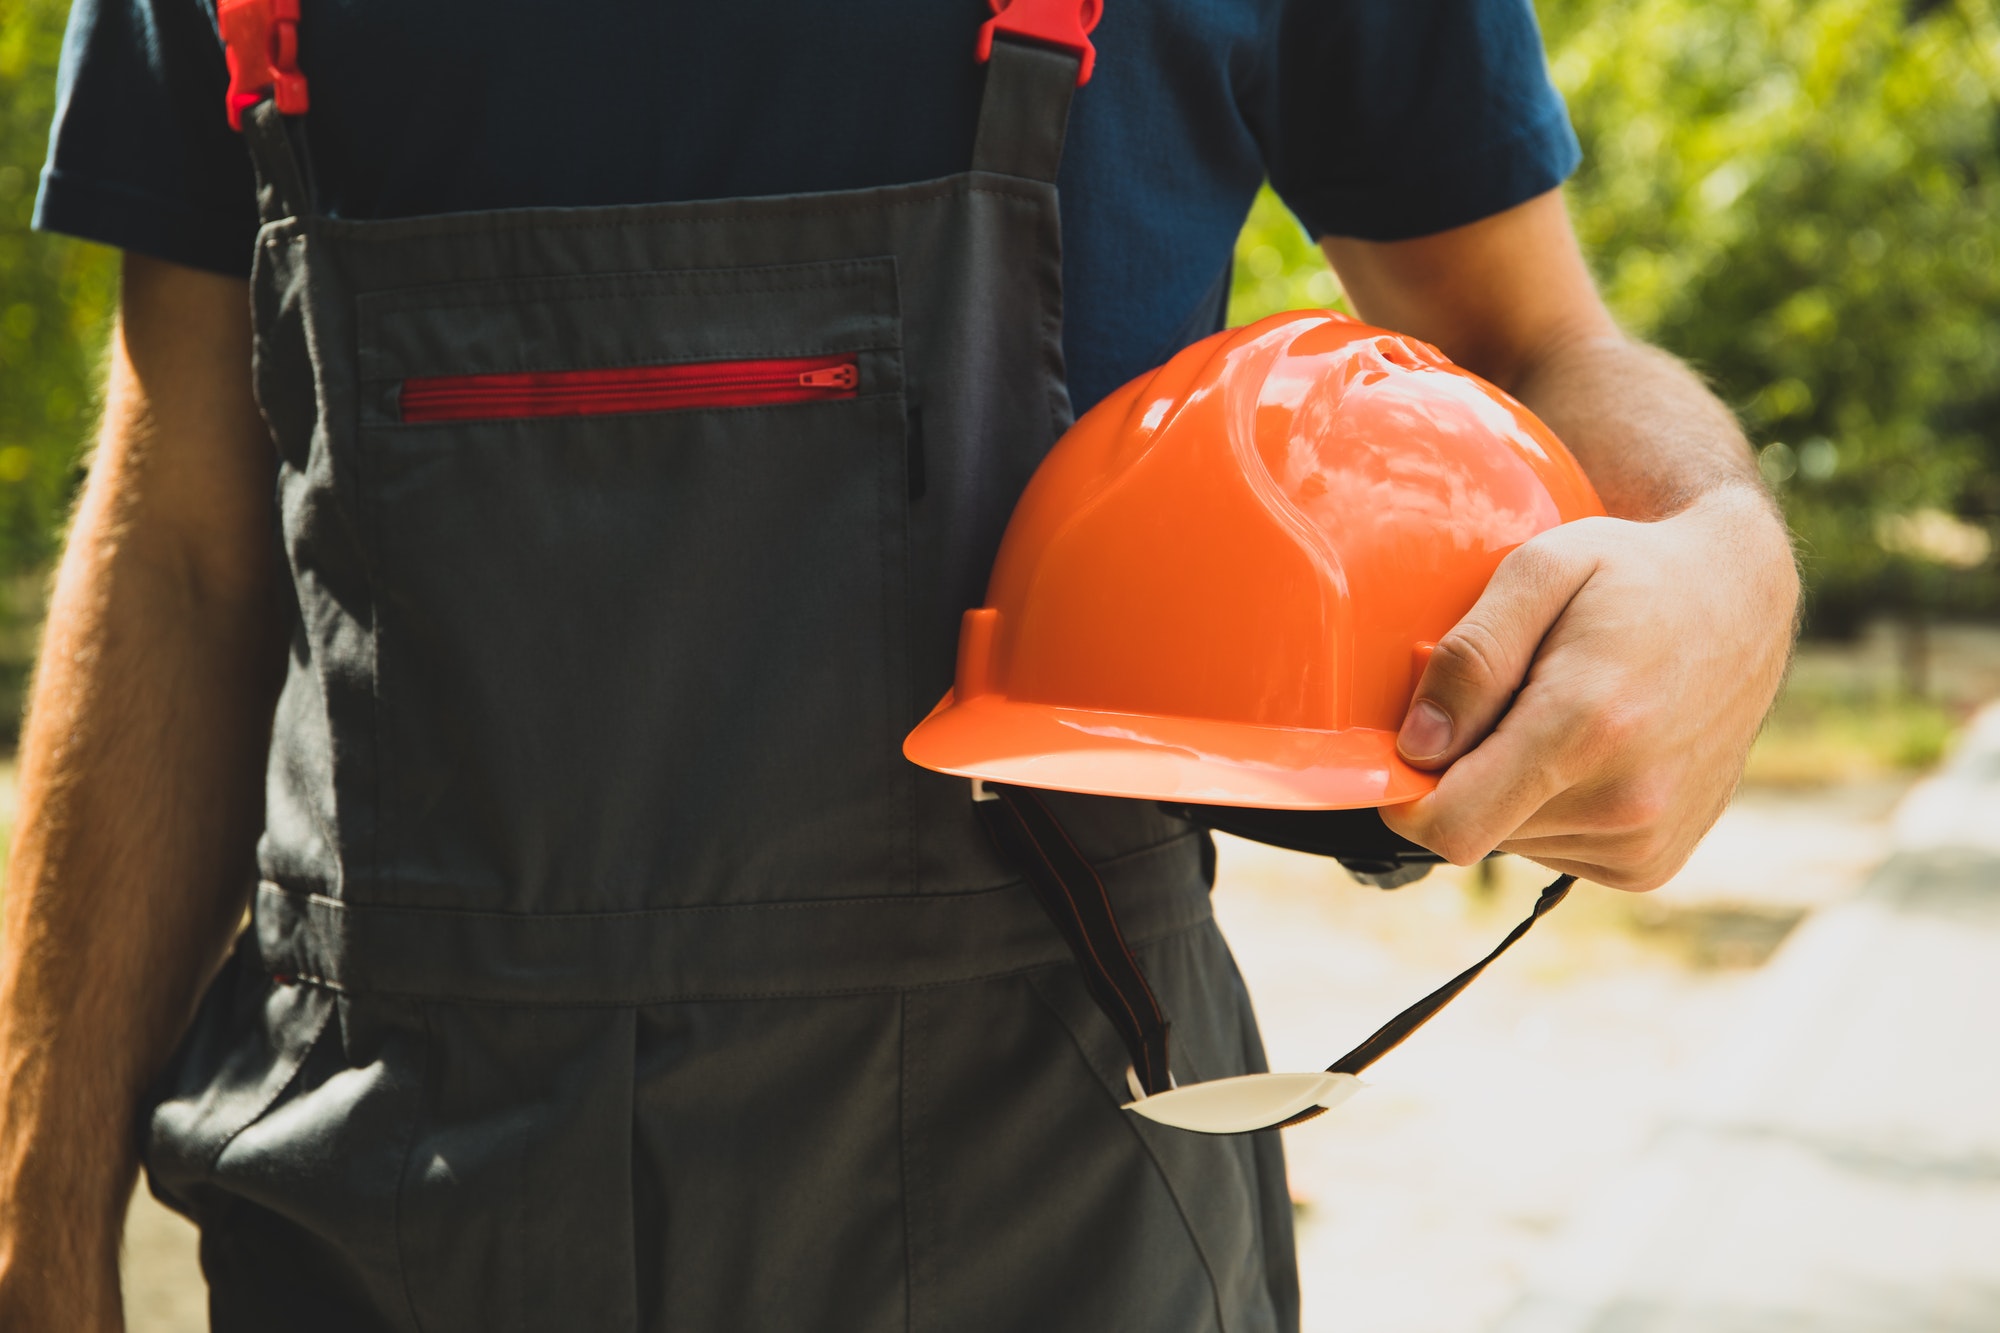 Man in overalls holds safety helmet outdoor